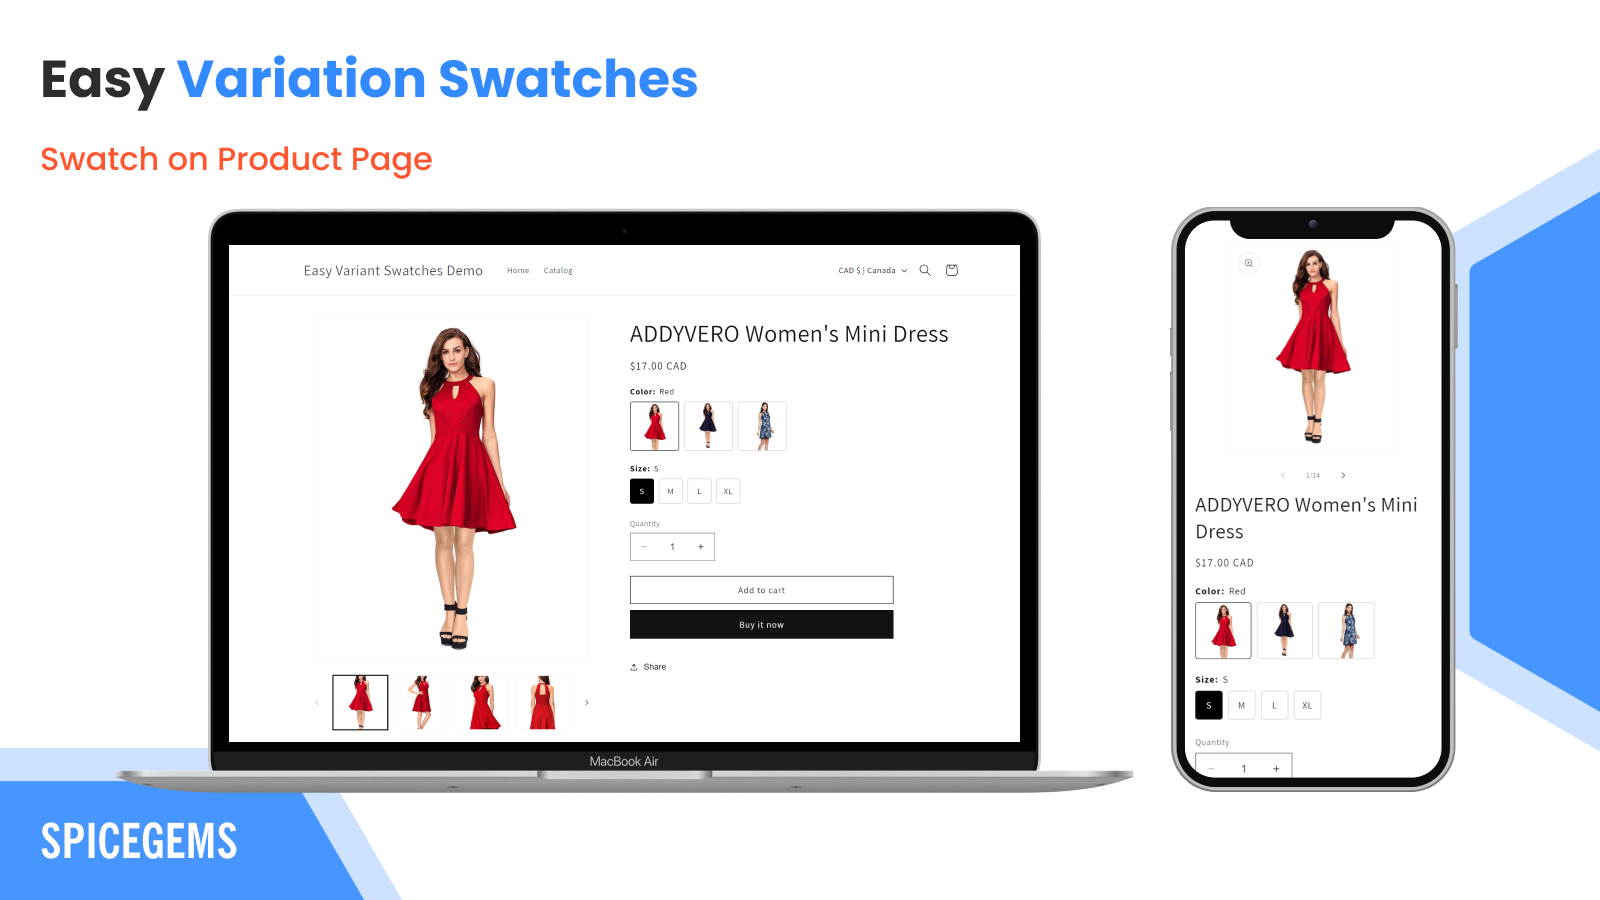 Swatch on Product Page